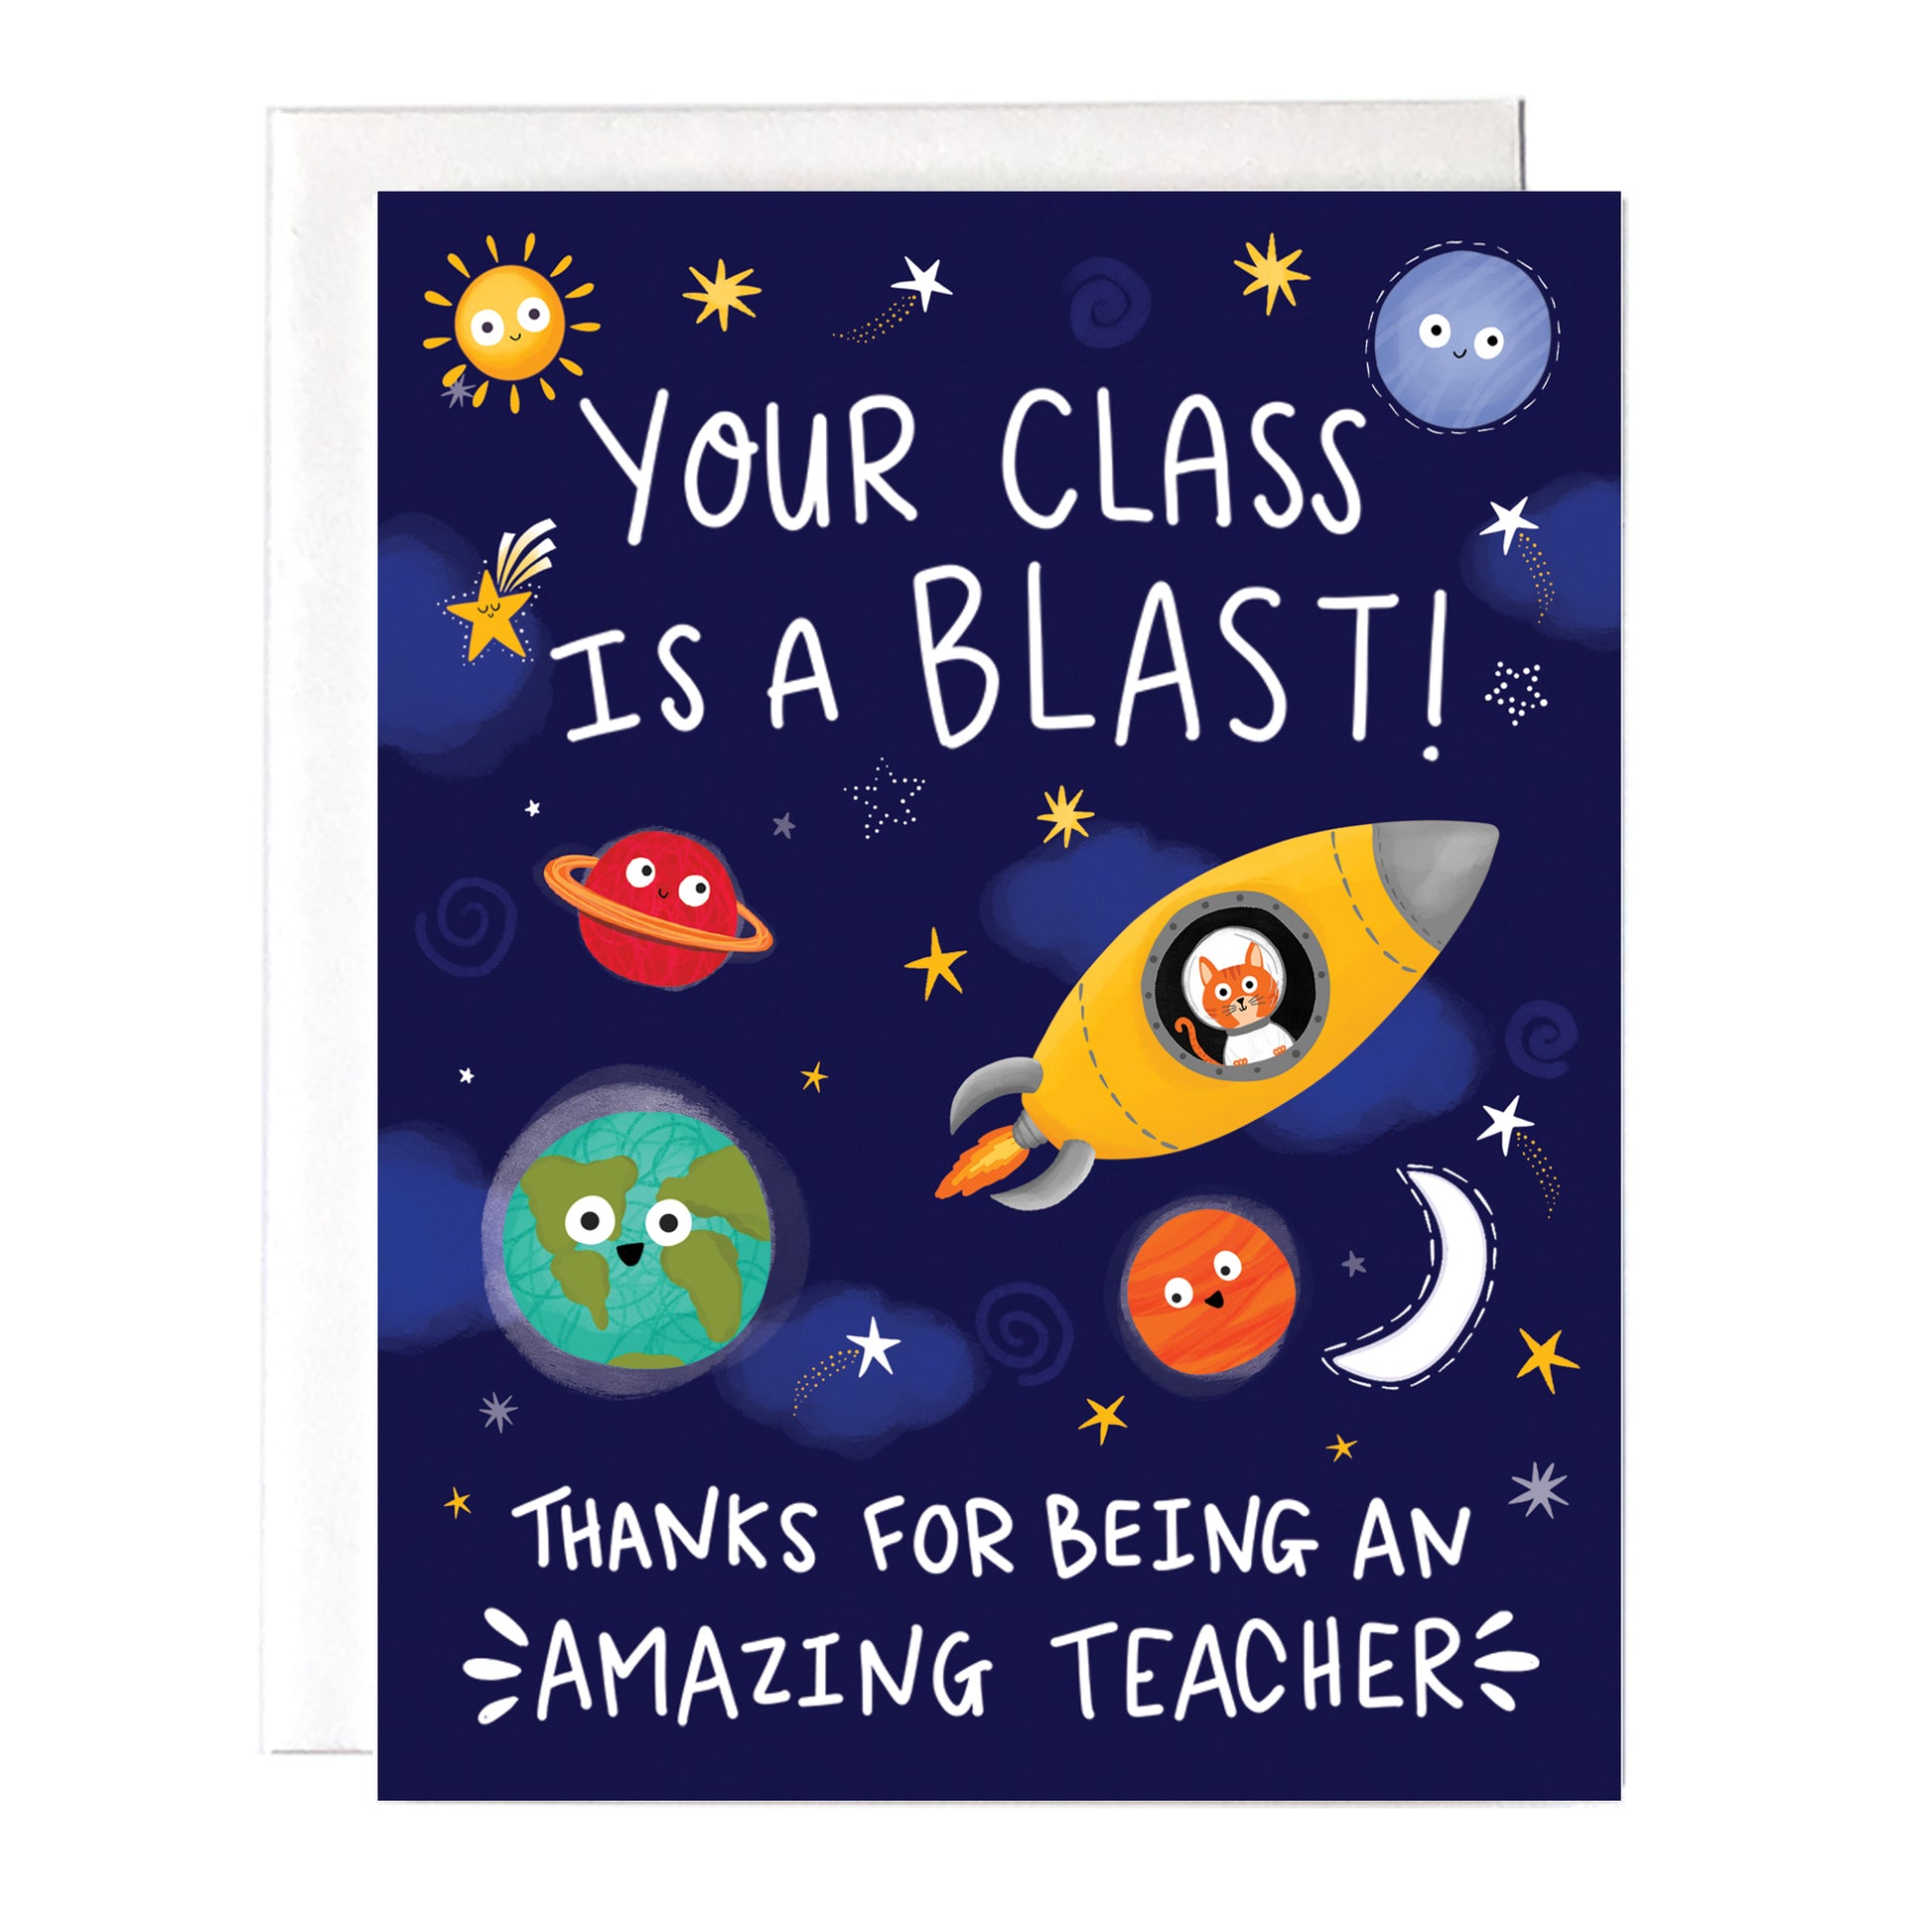 Give your teacher this thank you card to show your appreciation for everything they do! Size A2 greeting card (4.25" x 5.5") with envelope, blank Inside, Premium 120lb thick card stock. All cards are designed and Illustrated with love by me, Anna Fox, and are printed at my friendly neighborhood print shop in Denver, CO.